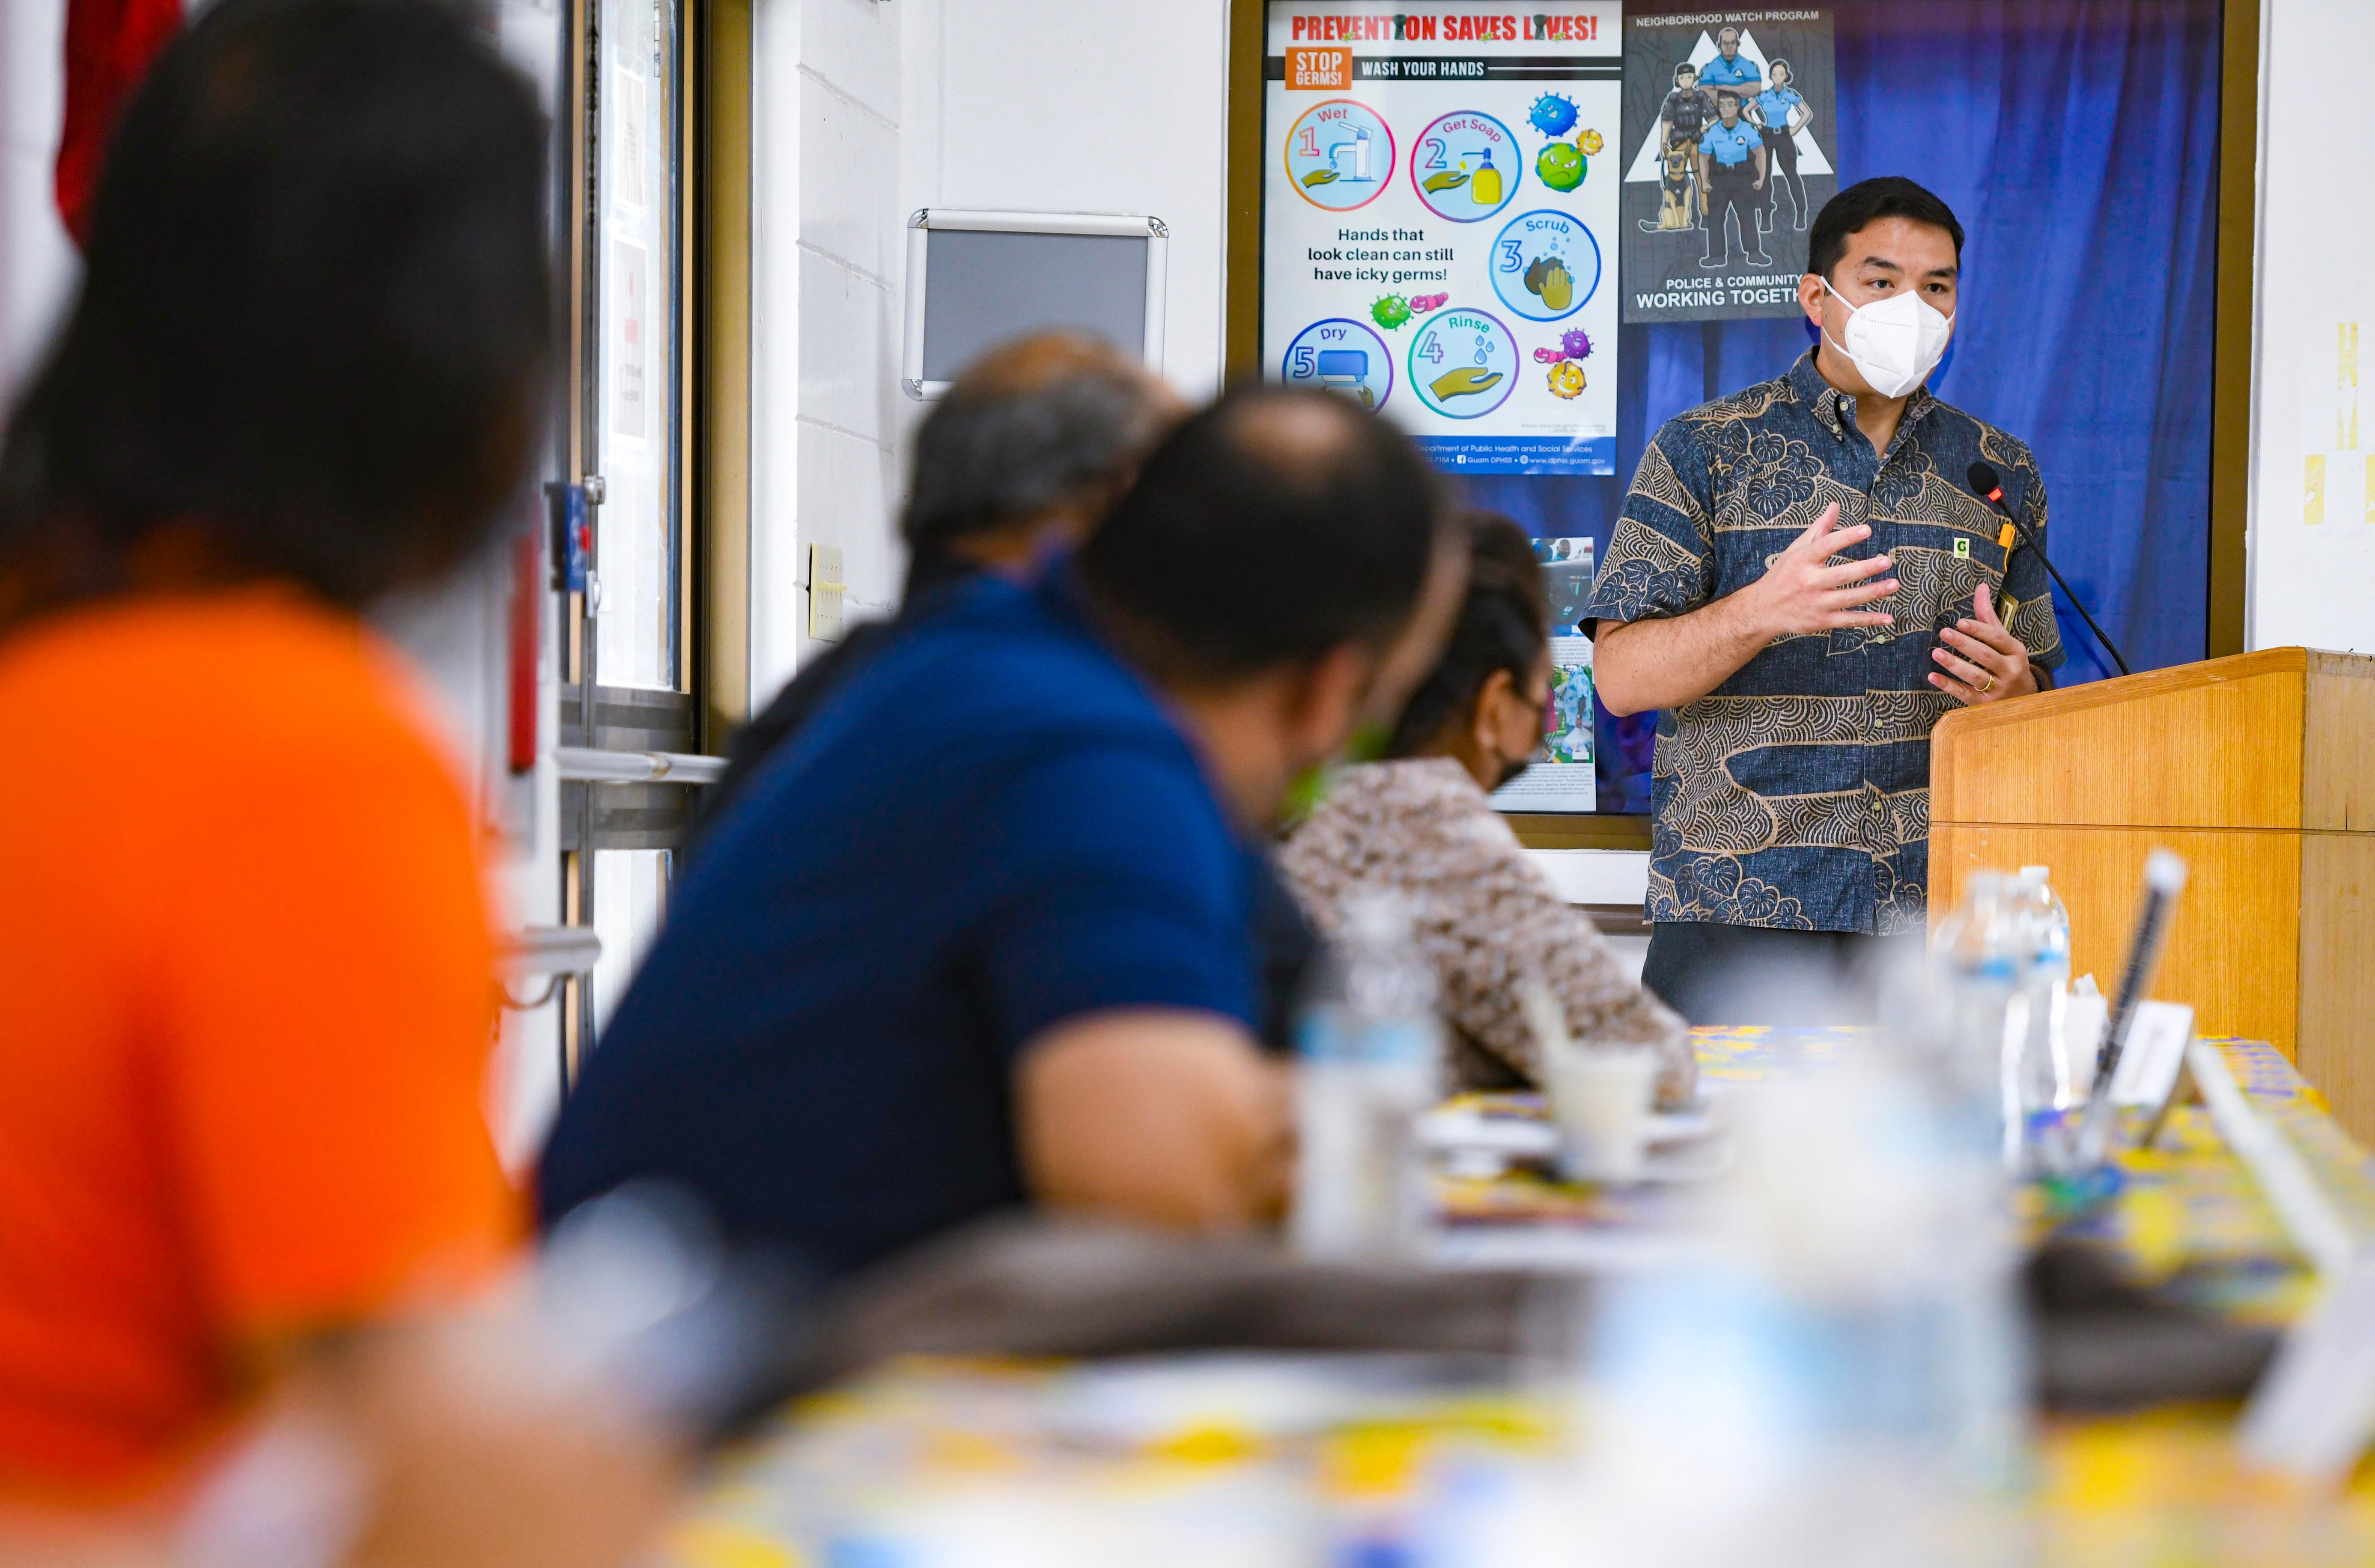 Austin Shelton, University of Guam Center for Island Sustainability executive director and UOG Sea Grant Program director, addresses village leaders during the Mayors' Council of Guam regular monthly meeting held at the Tamuning Senior Center on Wednesday, Feb. 3, 2021.